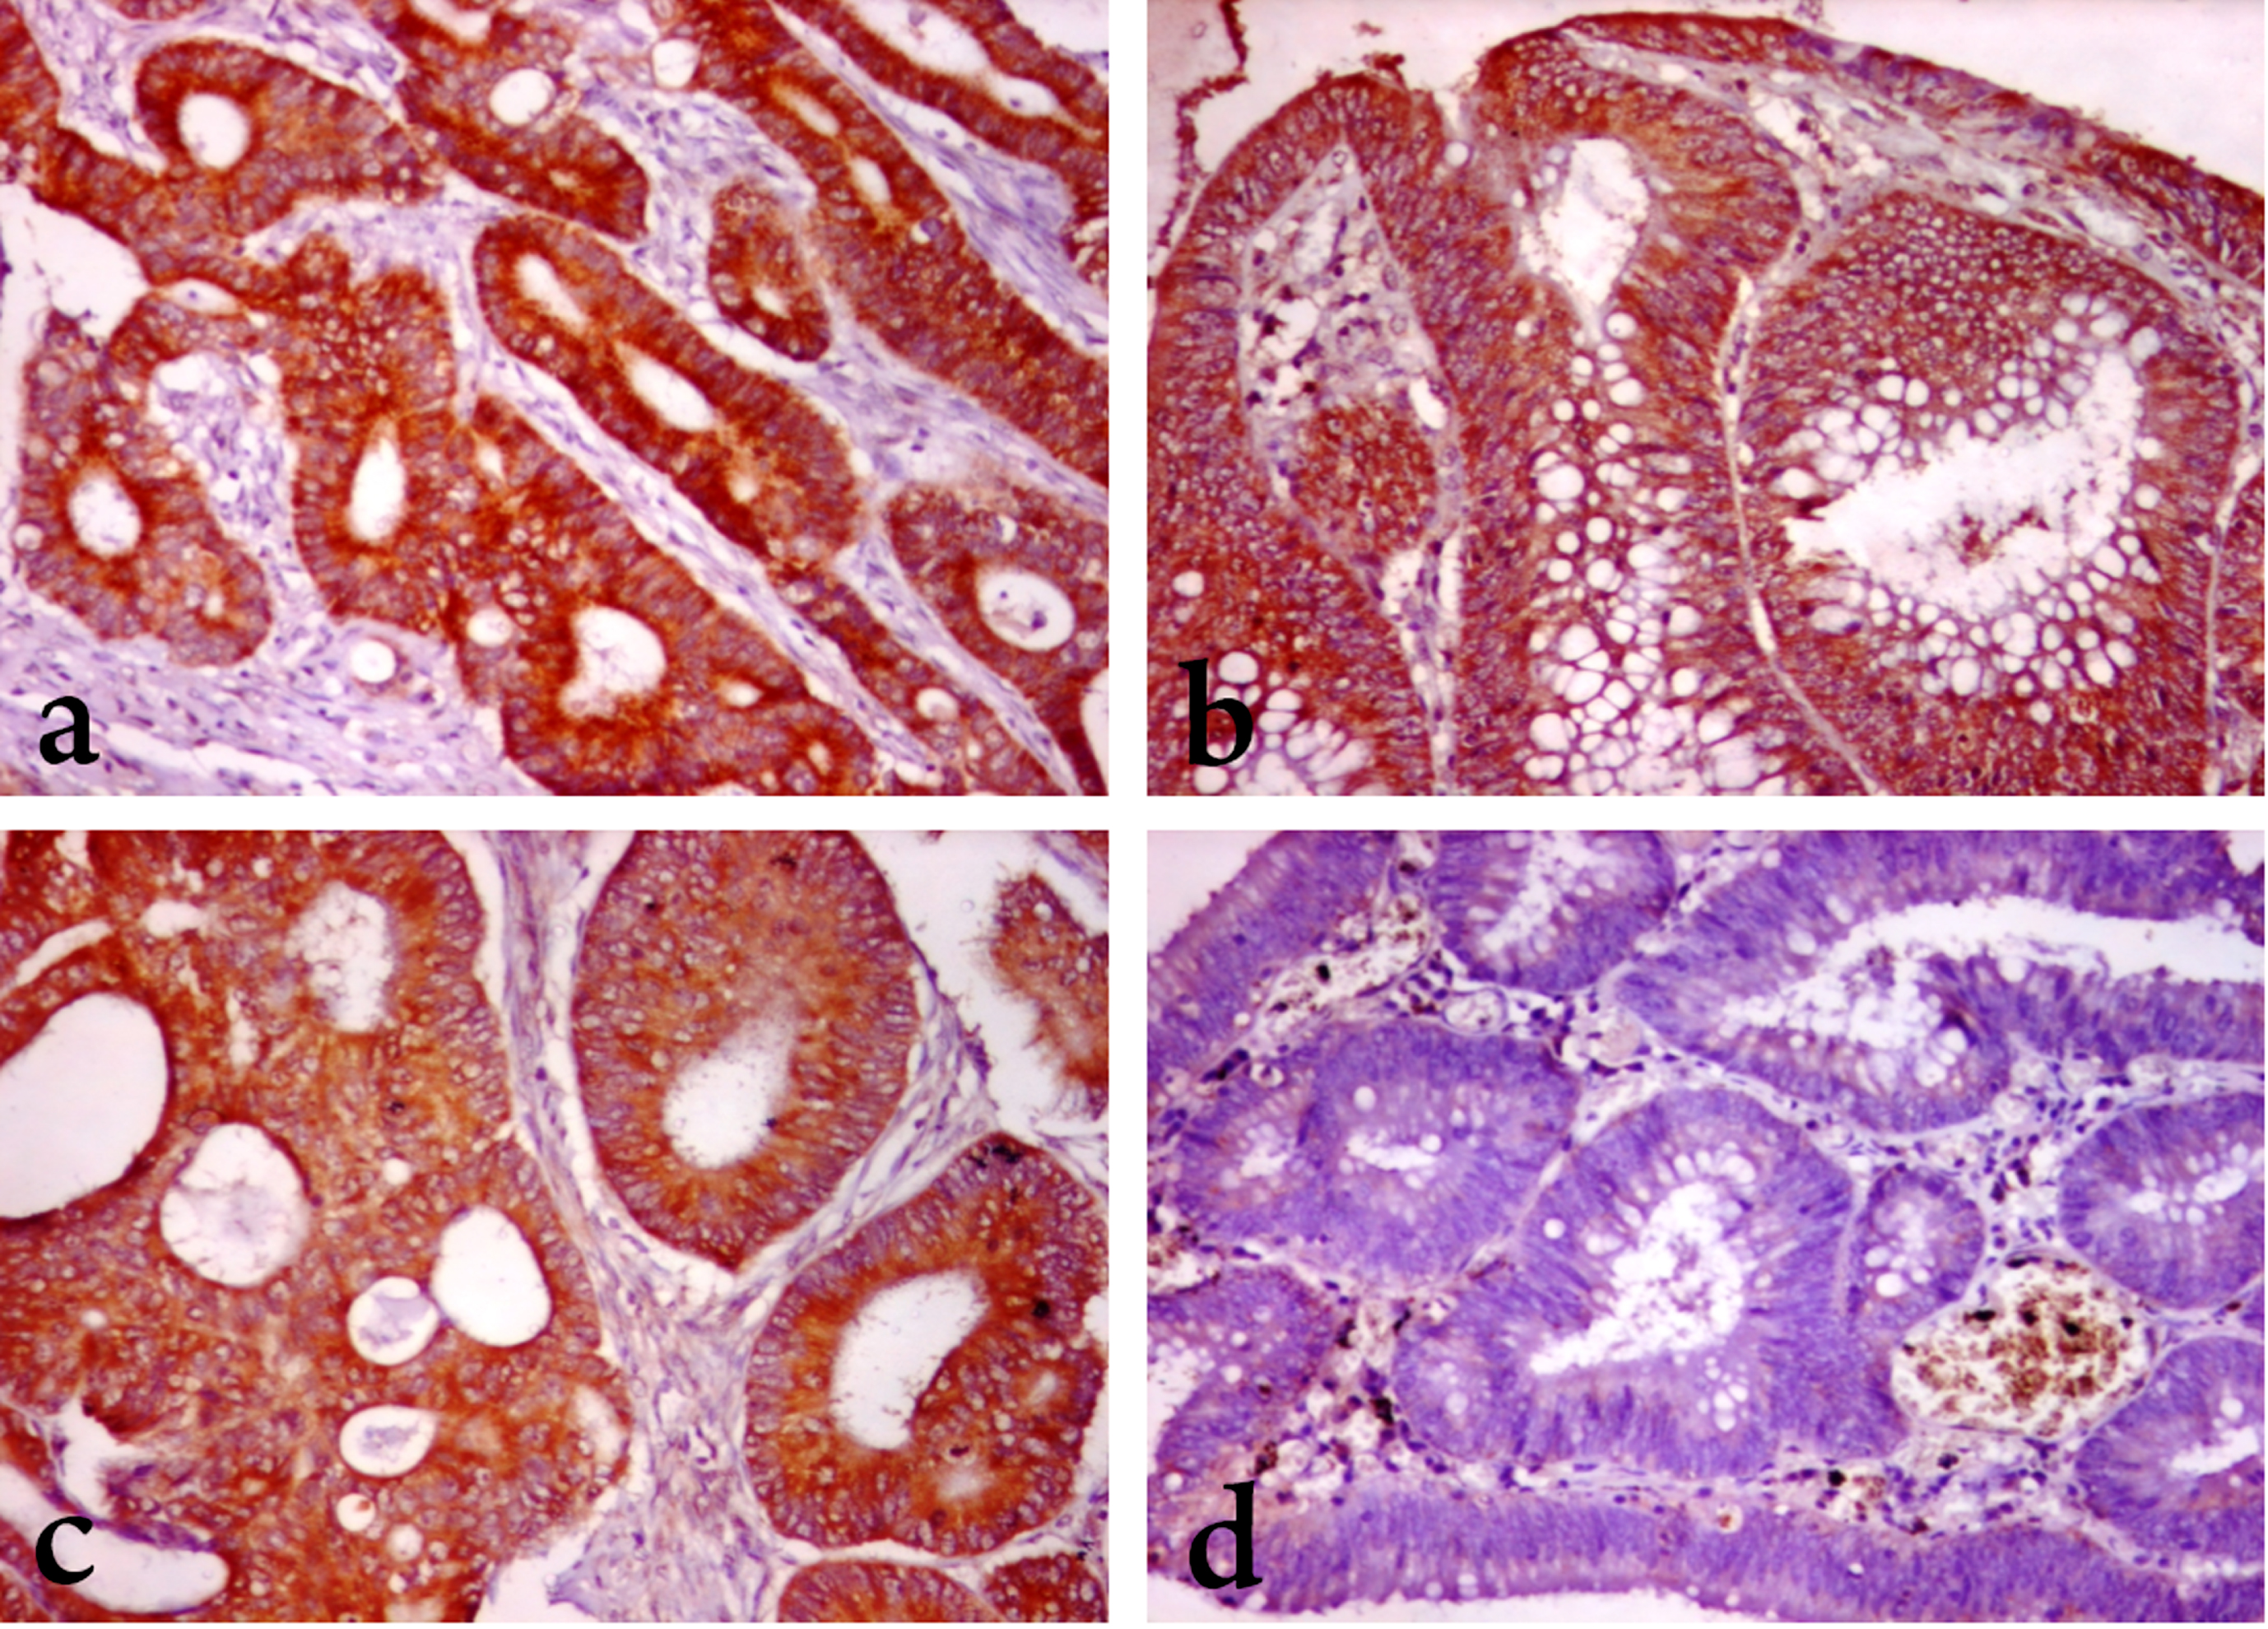 MEK1 and DIAPH3 expression in colorectal carcinoma and adenoma. (A) Marked MEK1 cytoplasmic staining in a case of grade II CRC (B) Moderate MEK1 cytoplasmic staining in moderately dysplastic epithelium of adenoma. (C) Moderate DIAPH3 cytoplasmic staining in in a case of grade II CRC. (D) Negative DIAPH3 staining in moderately dysplastic adenoma. (x 200).